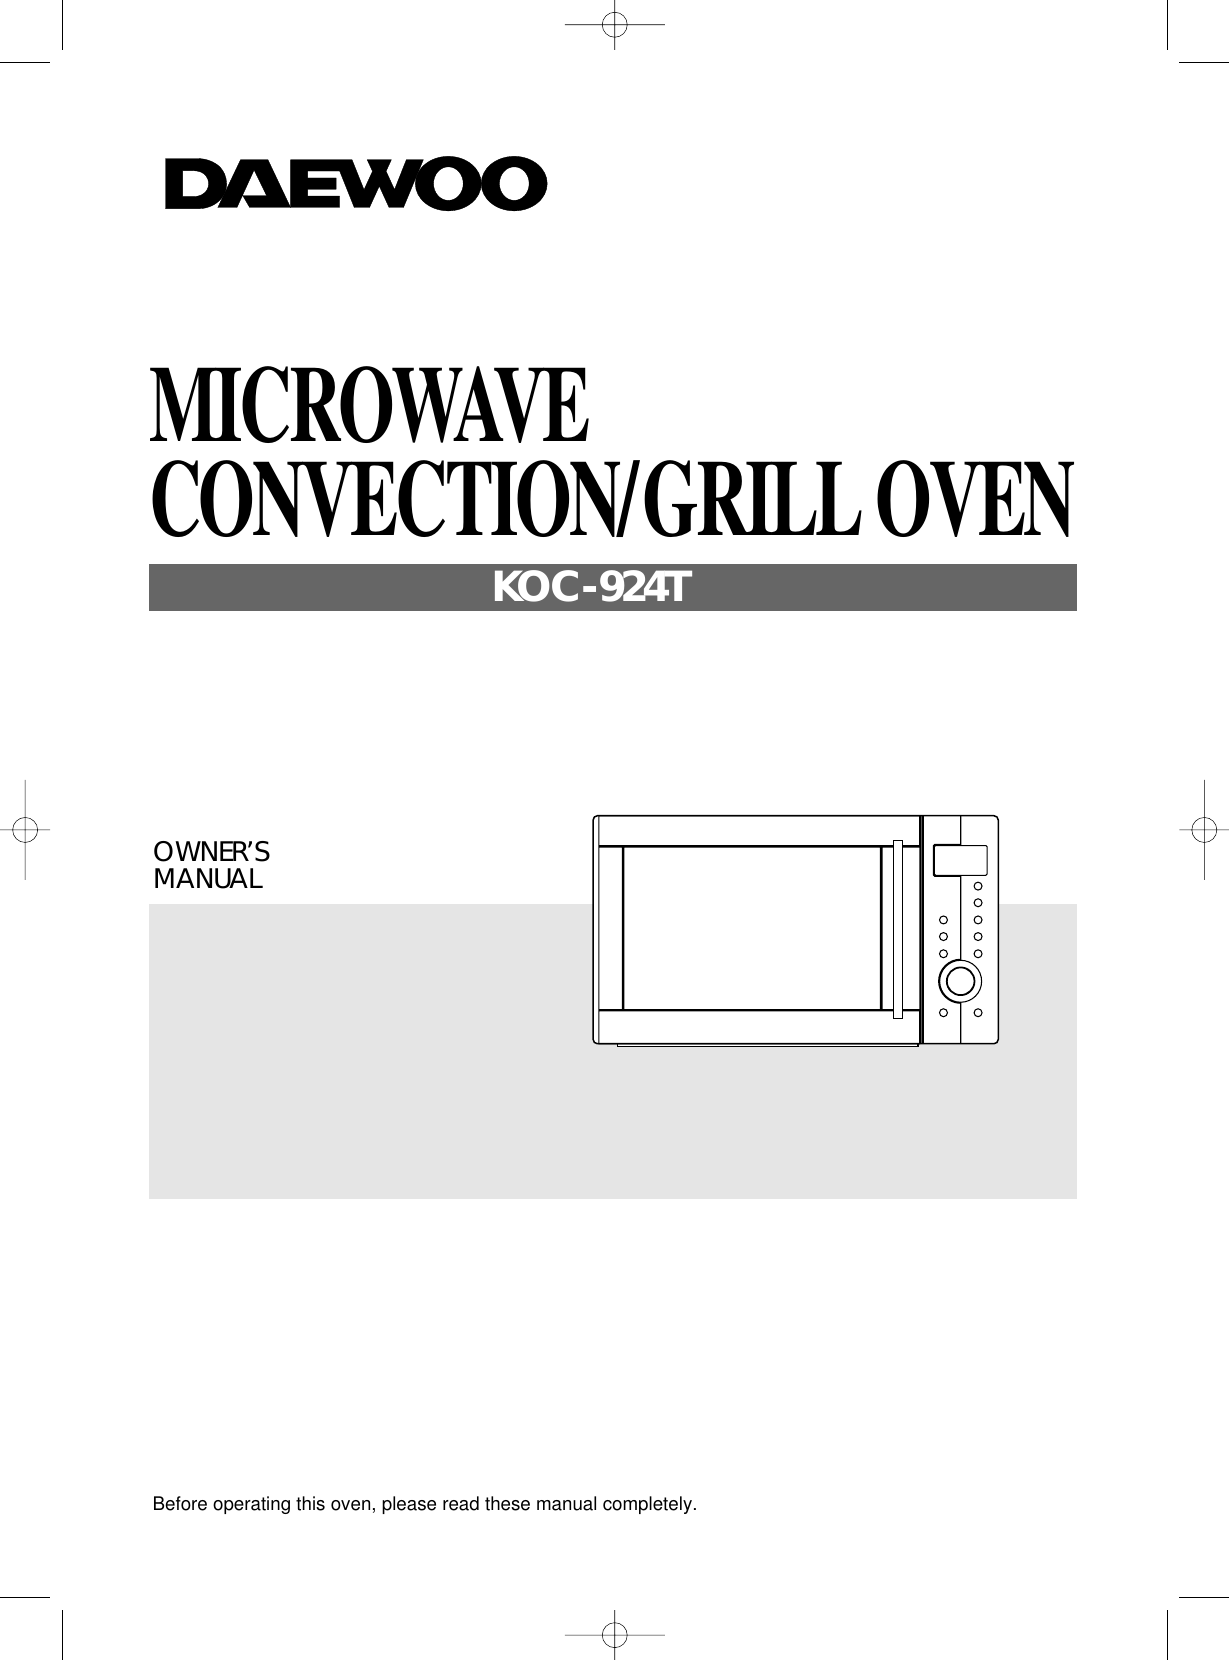 Before operating this oven, please read these manual completely.OWNER’SMANUALMICROWAVECONVECTION/GRILL OVENKOC-924T